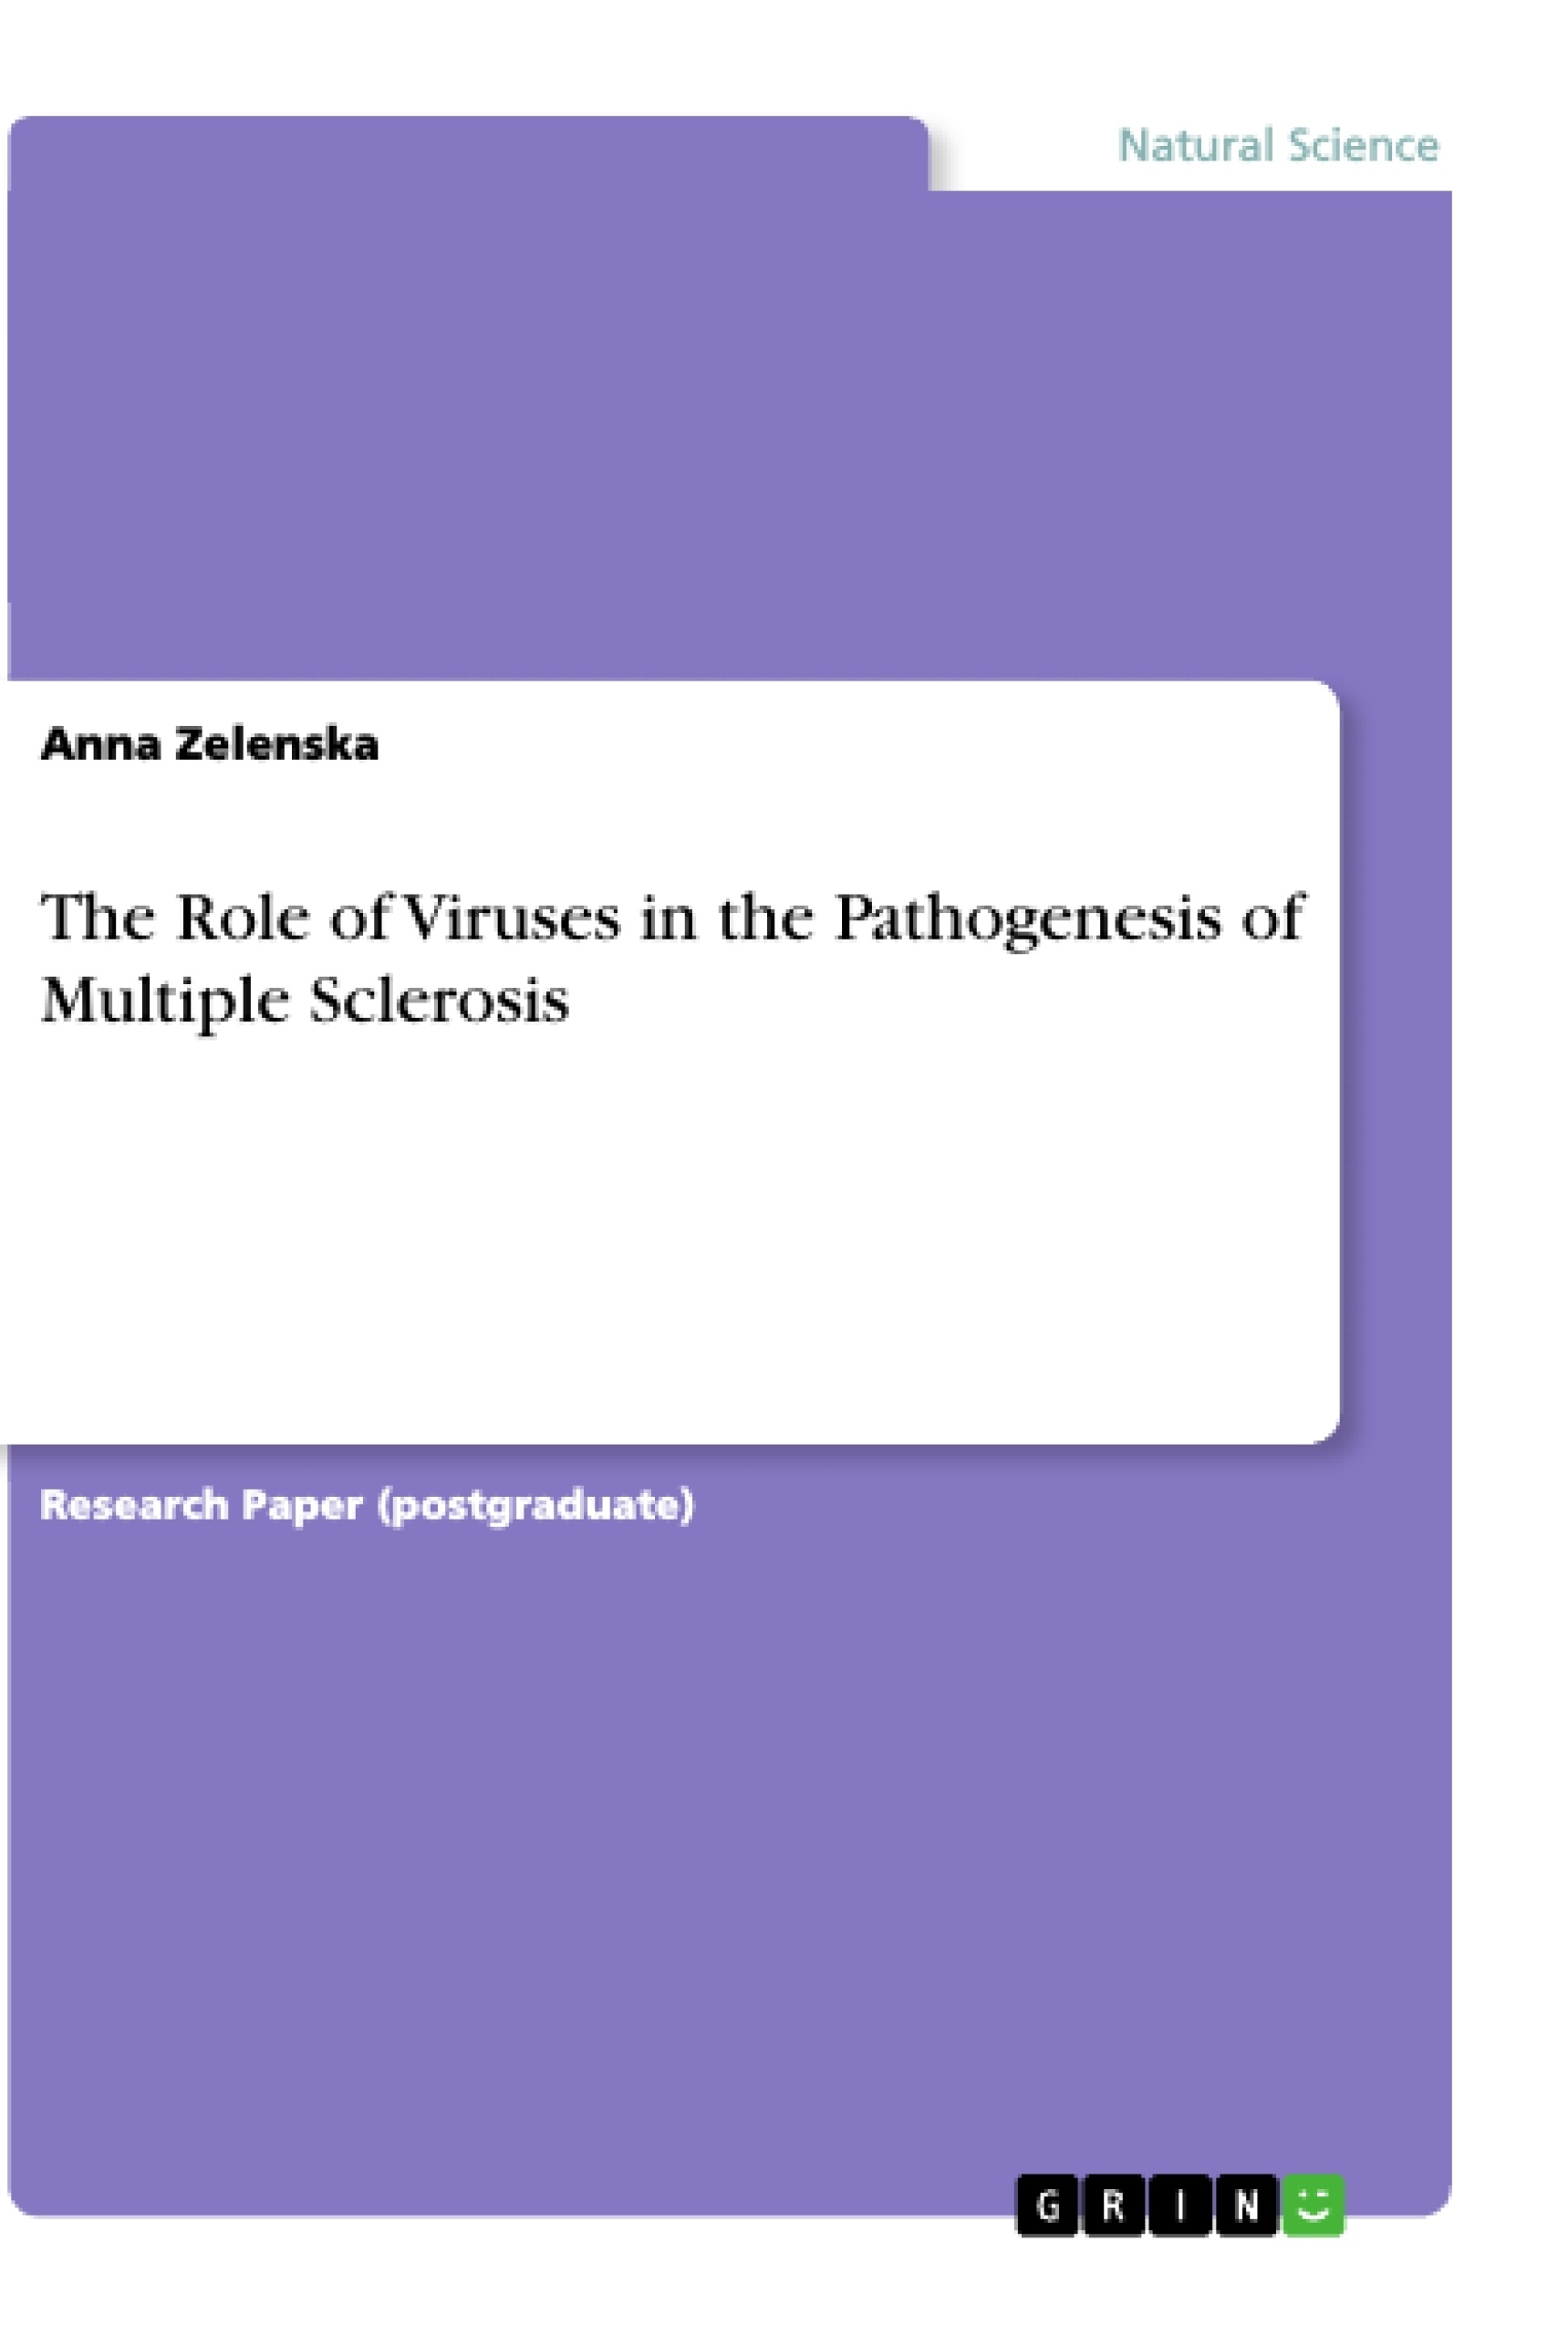 Title: The Role of Viruses in the Pathogenesis of Multiple Sclerosis